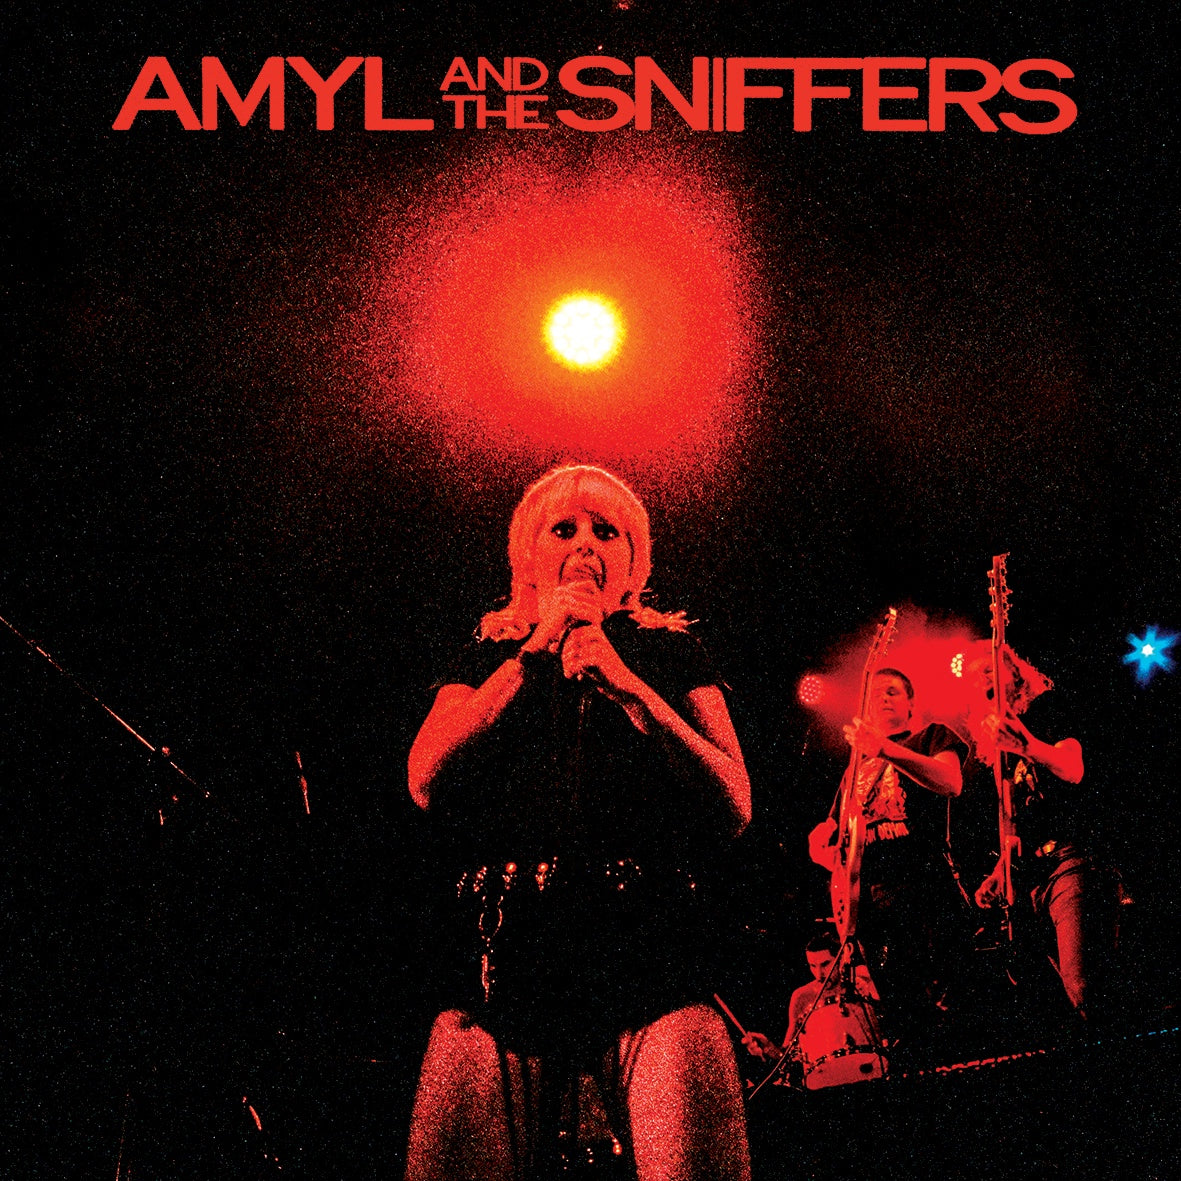 NEW - Amyl & the Sniffers, Big Attraction and Giddy Up LP (UK)